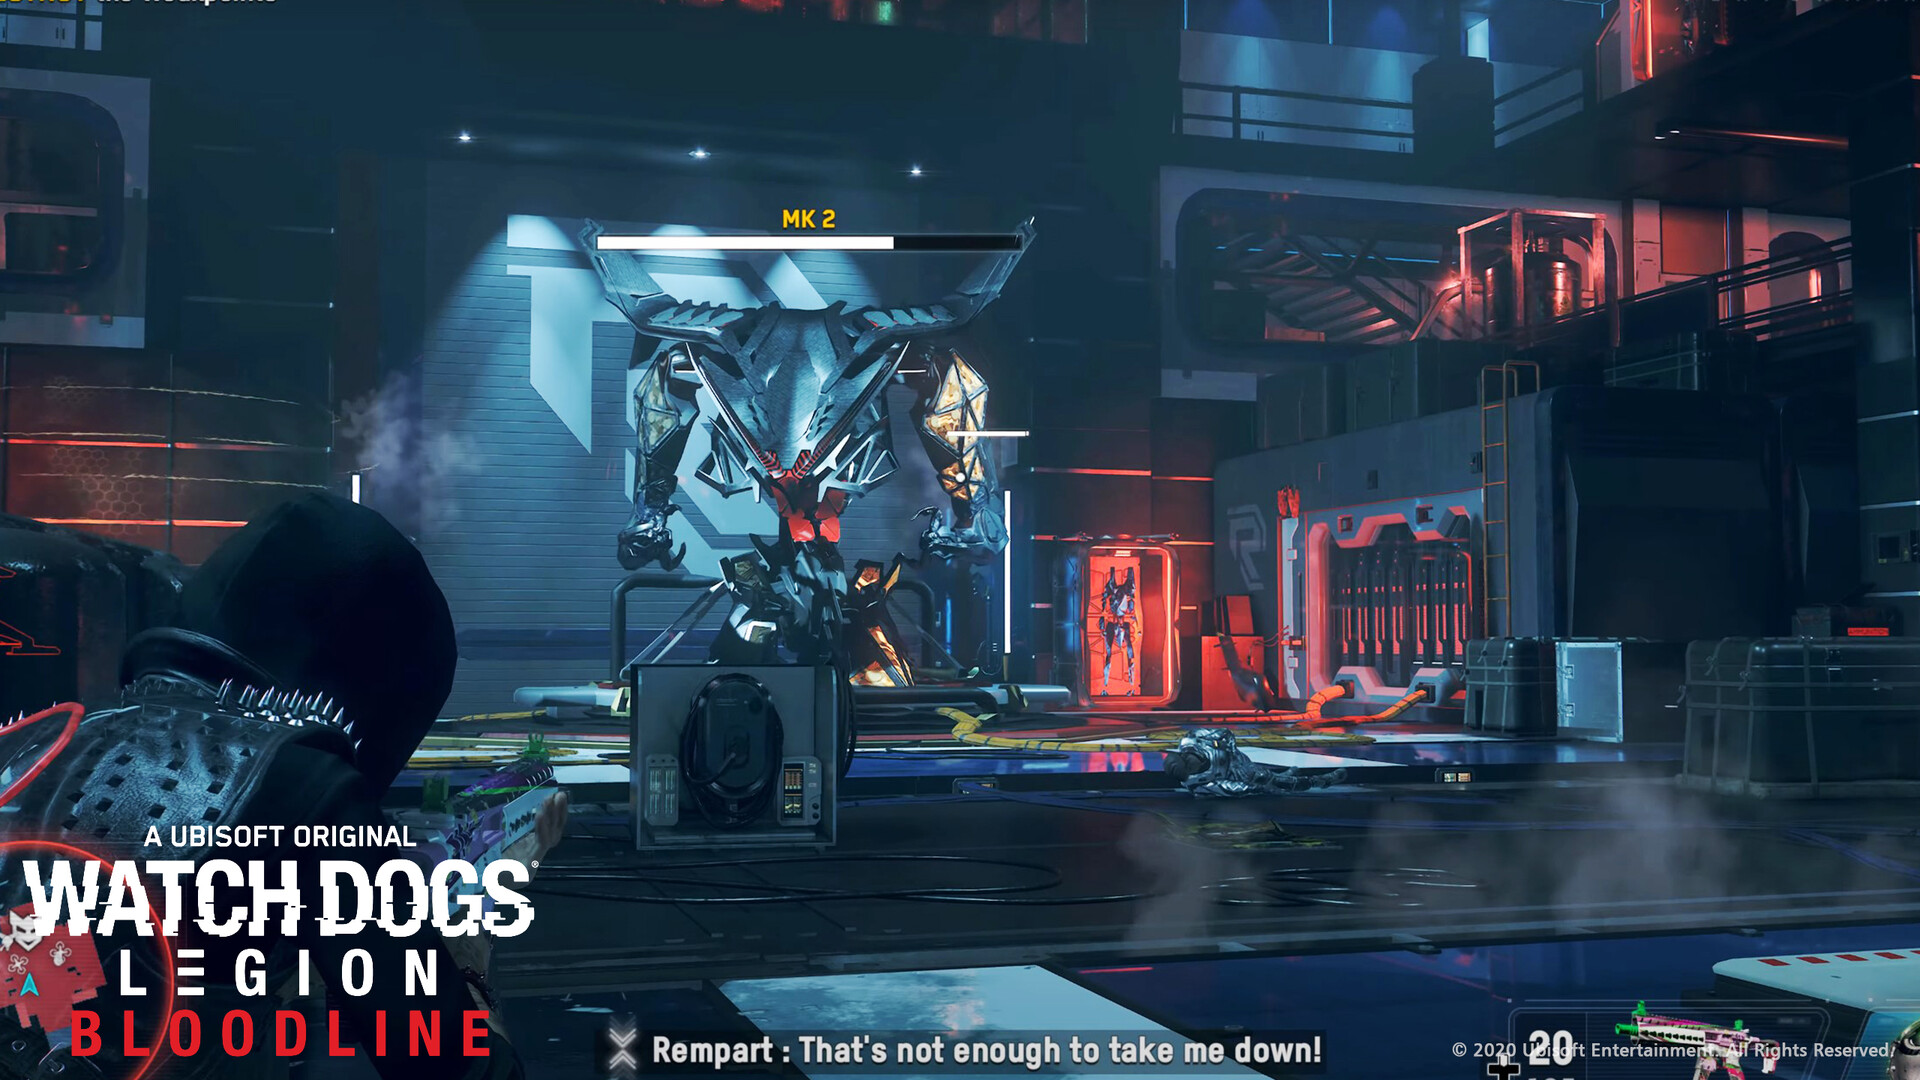 Watch Dogs: Legion: Behind the Scenes of Bloodline Expansion, Ubisoft [NA]